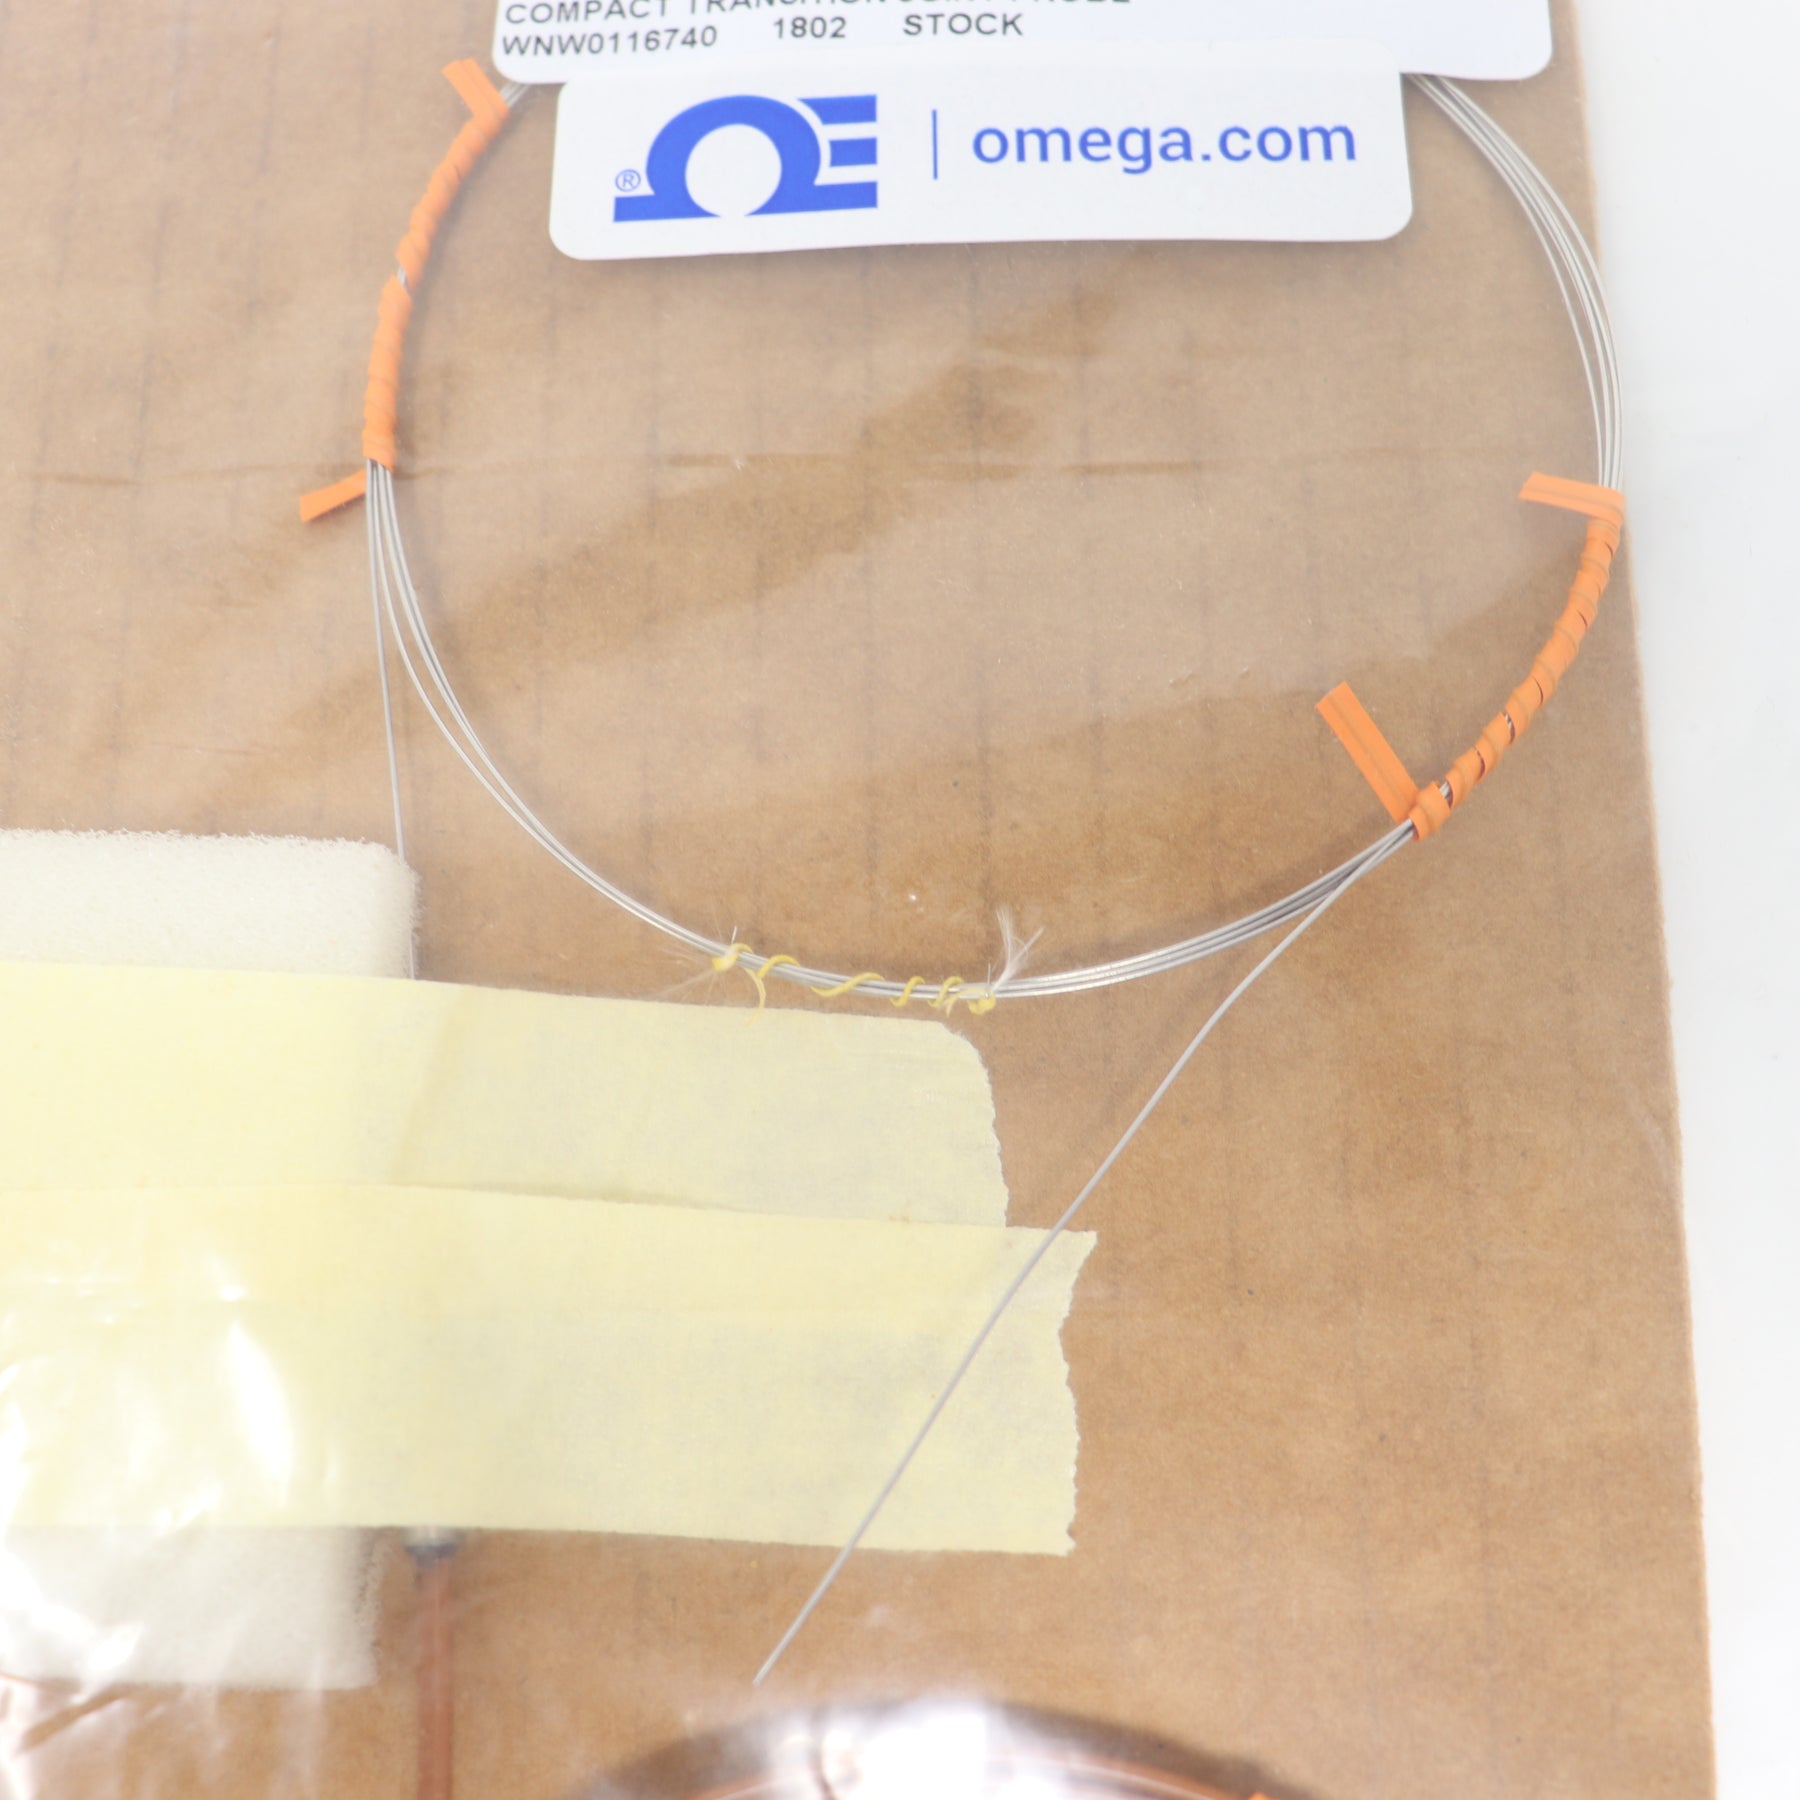 Omega Thermocouple Compact Transition Joint Probe TJC24-CAIN-020U-60